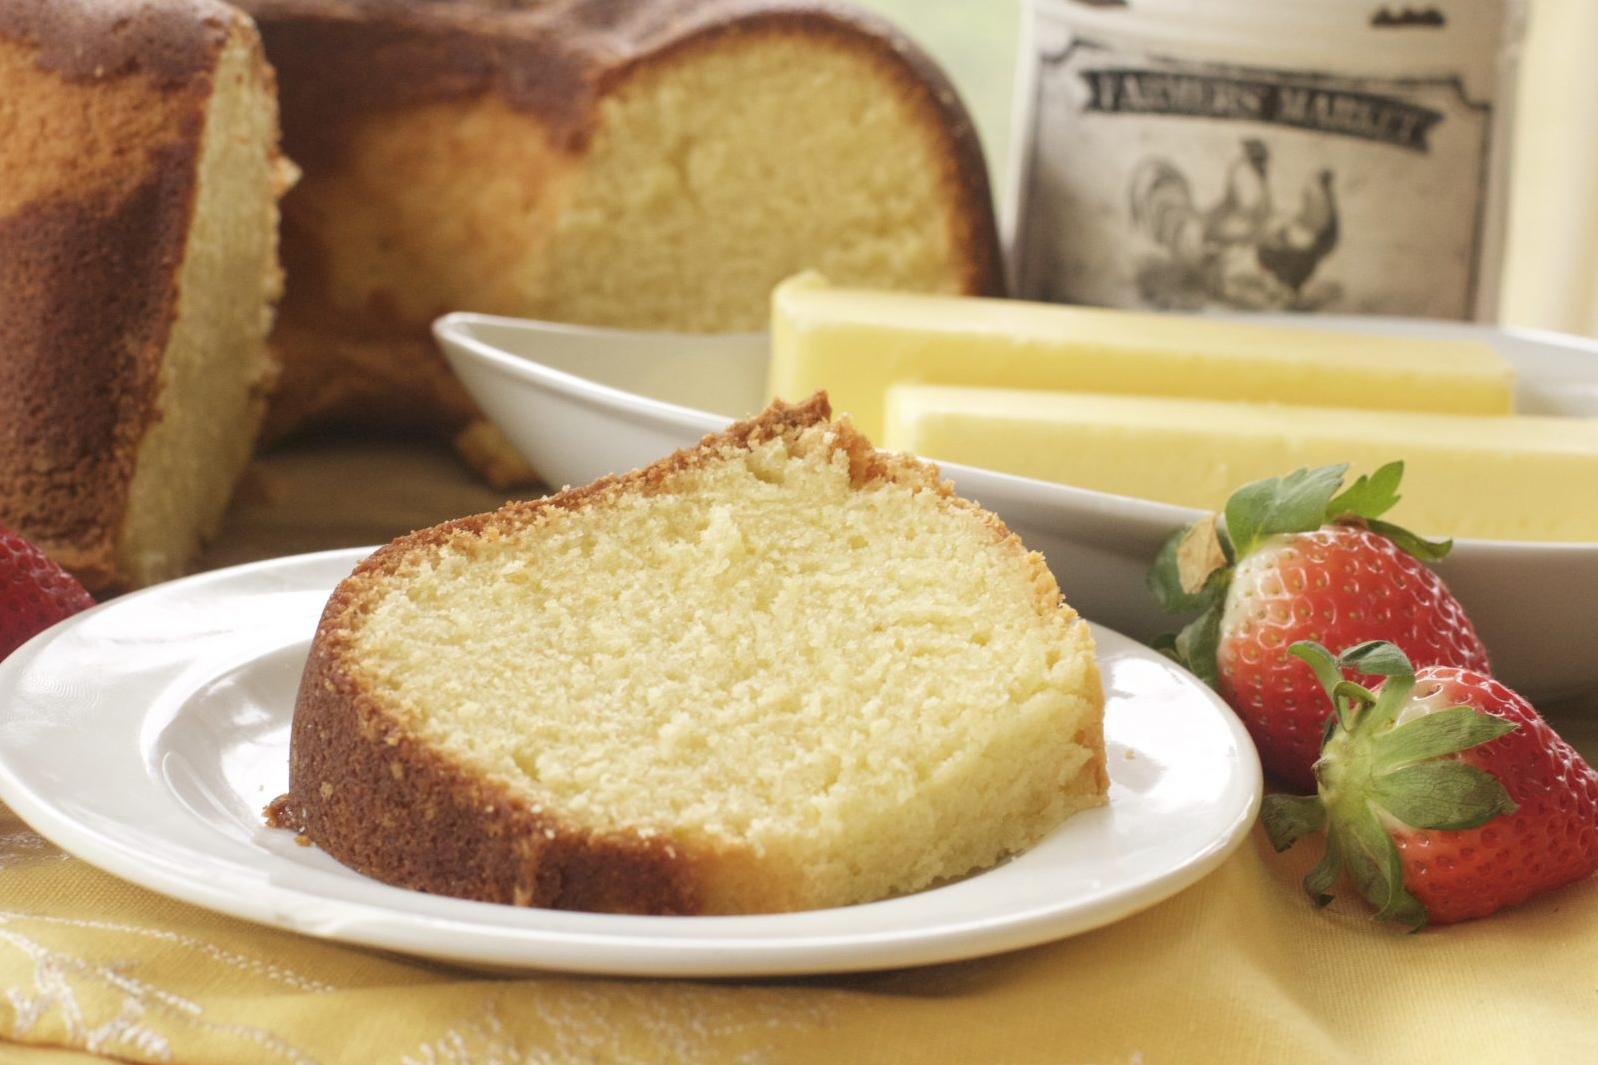  Old-fashioned Goodness: A slice of our pound cake tastes like a trip back in time.